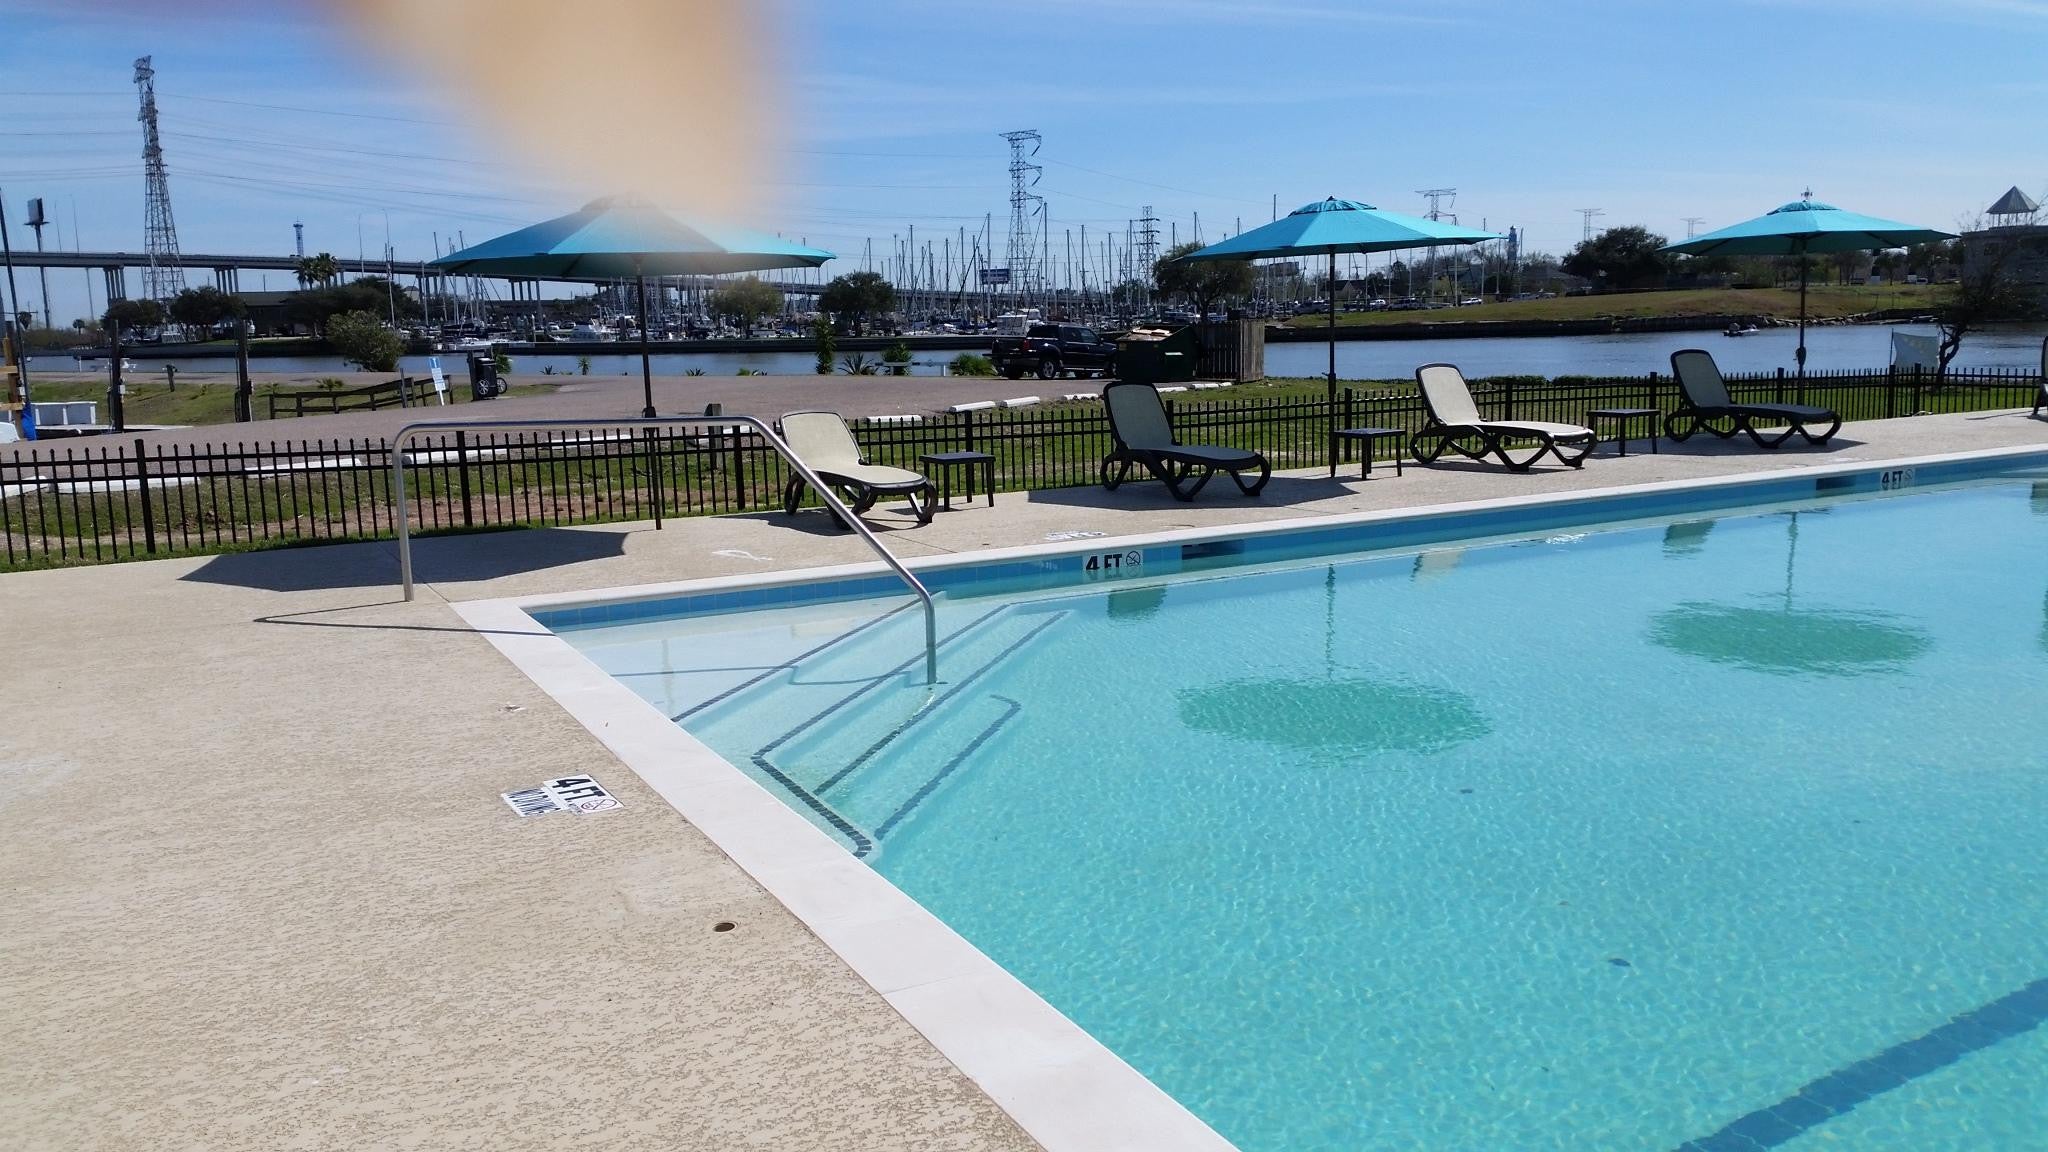 seabrook marina new pool opens in April